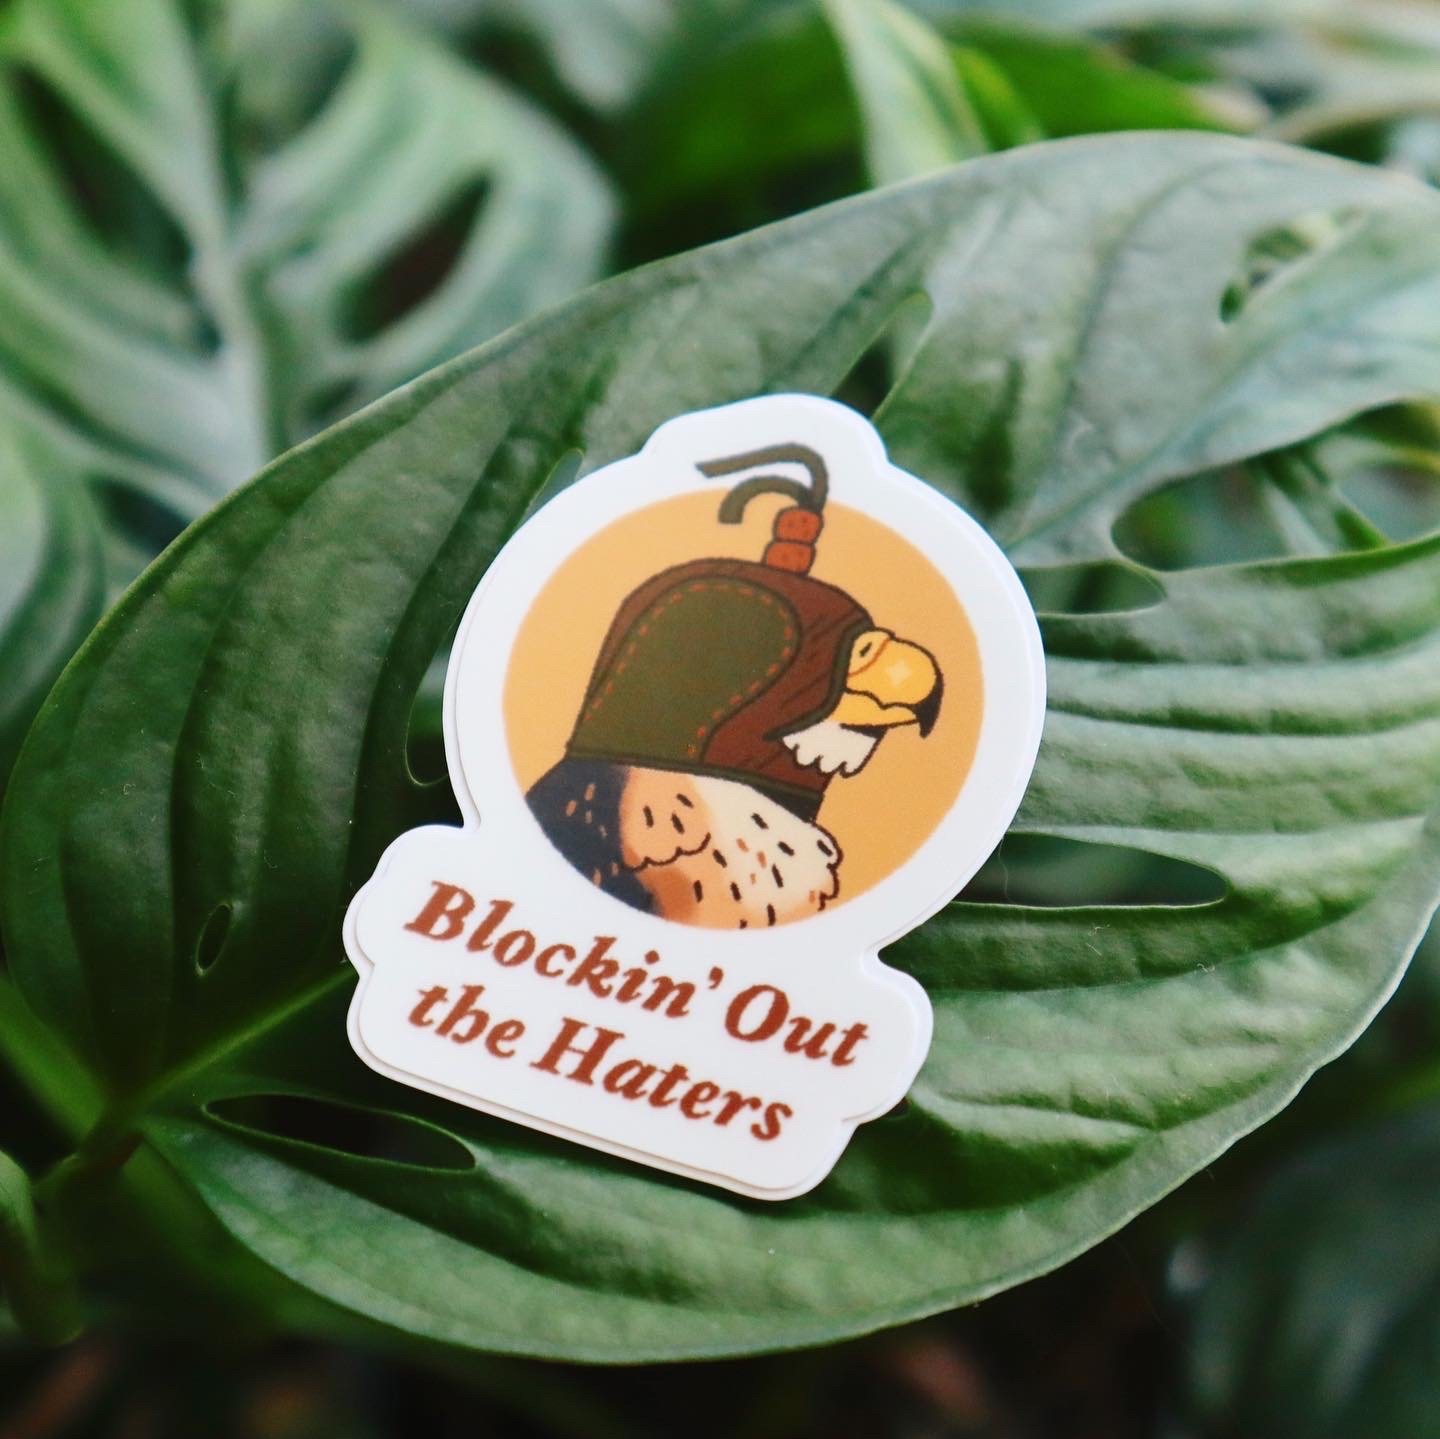 Blockin' Out the Haters Sticker